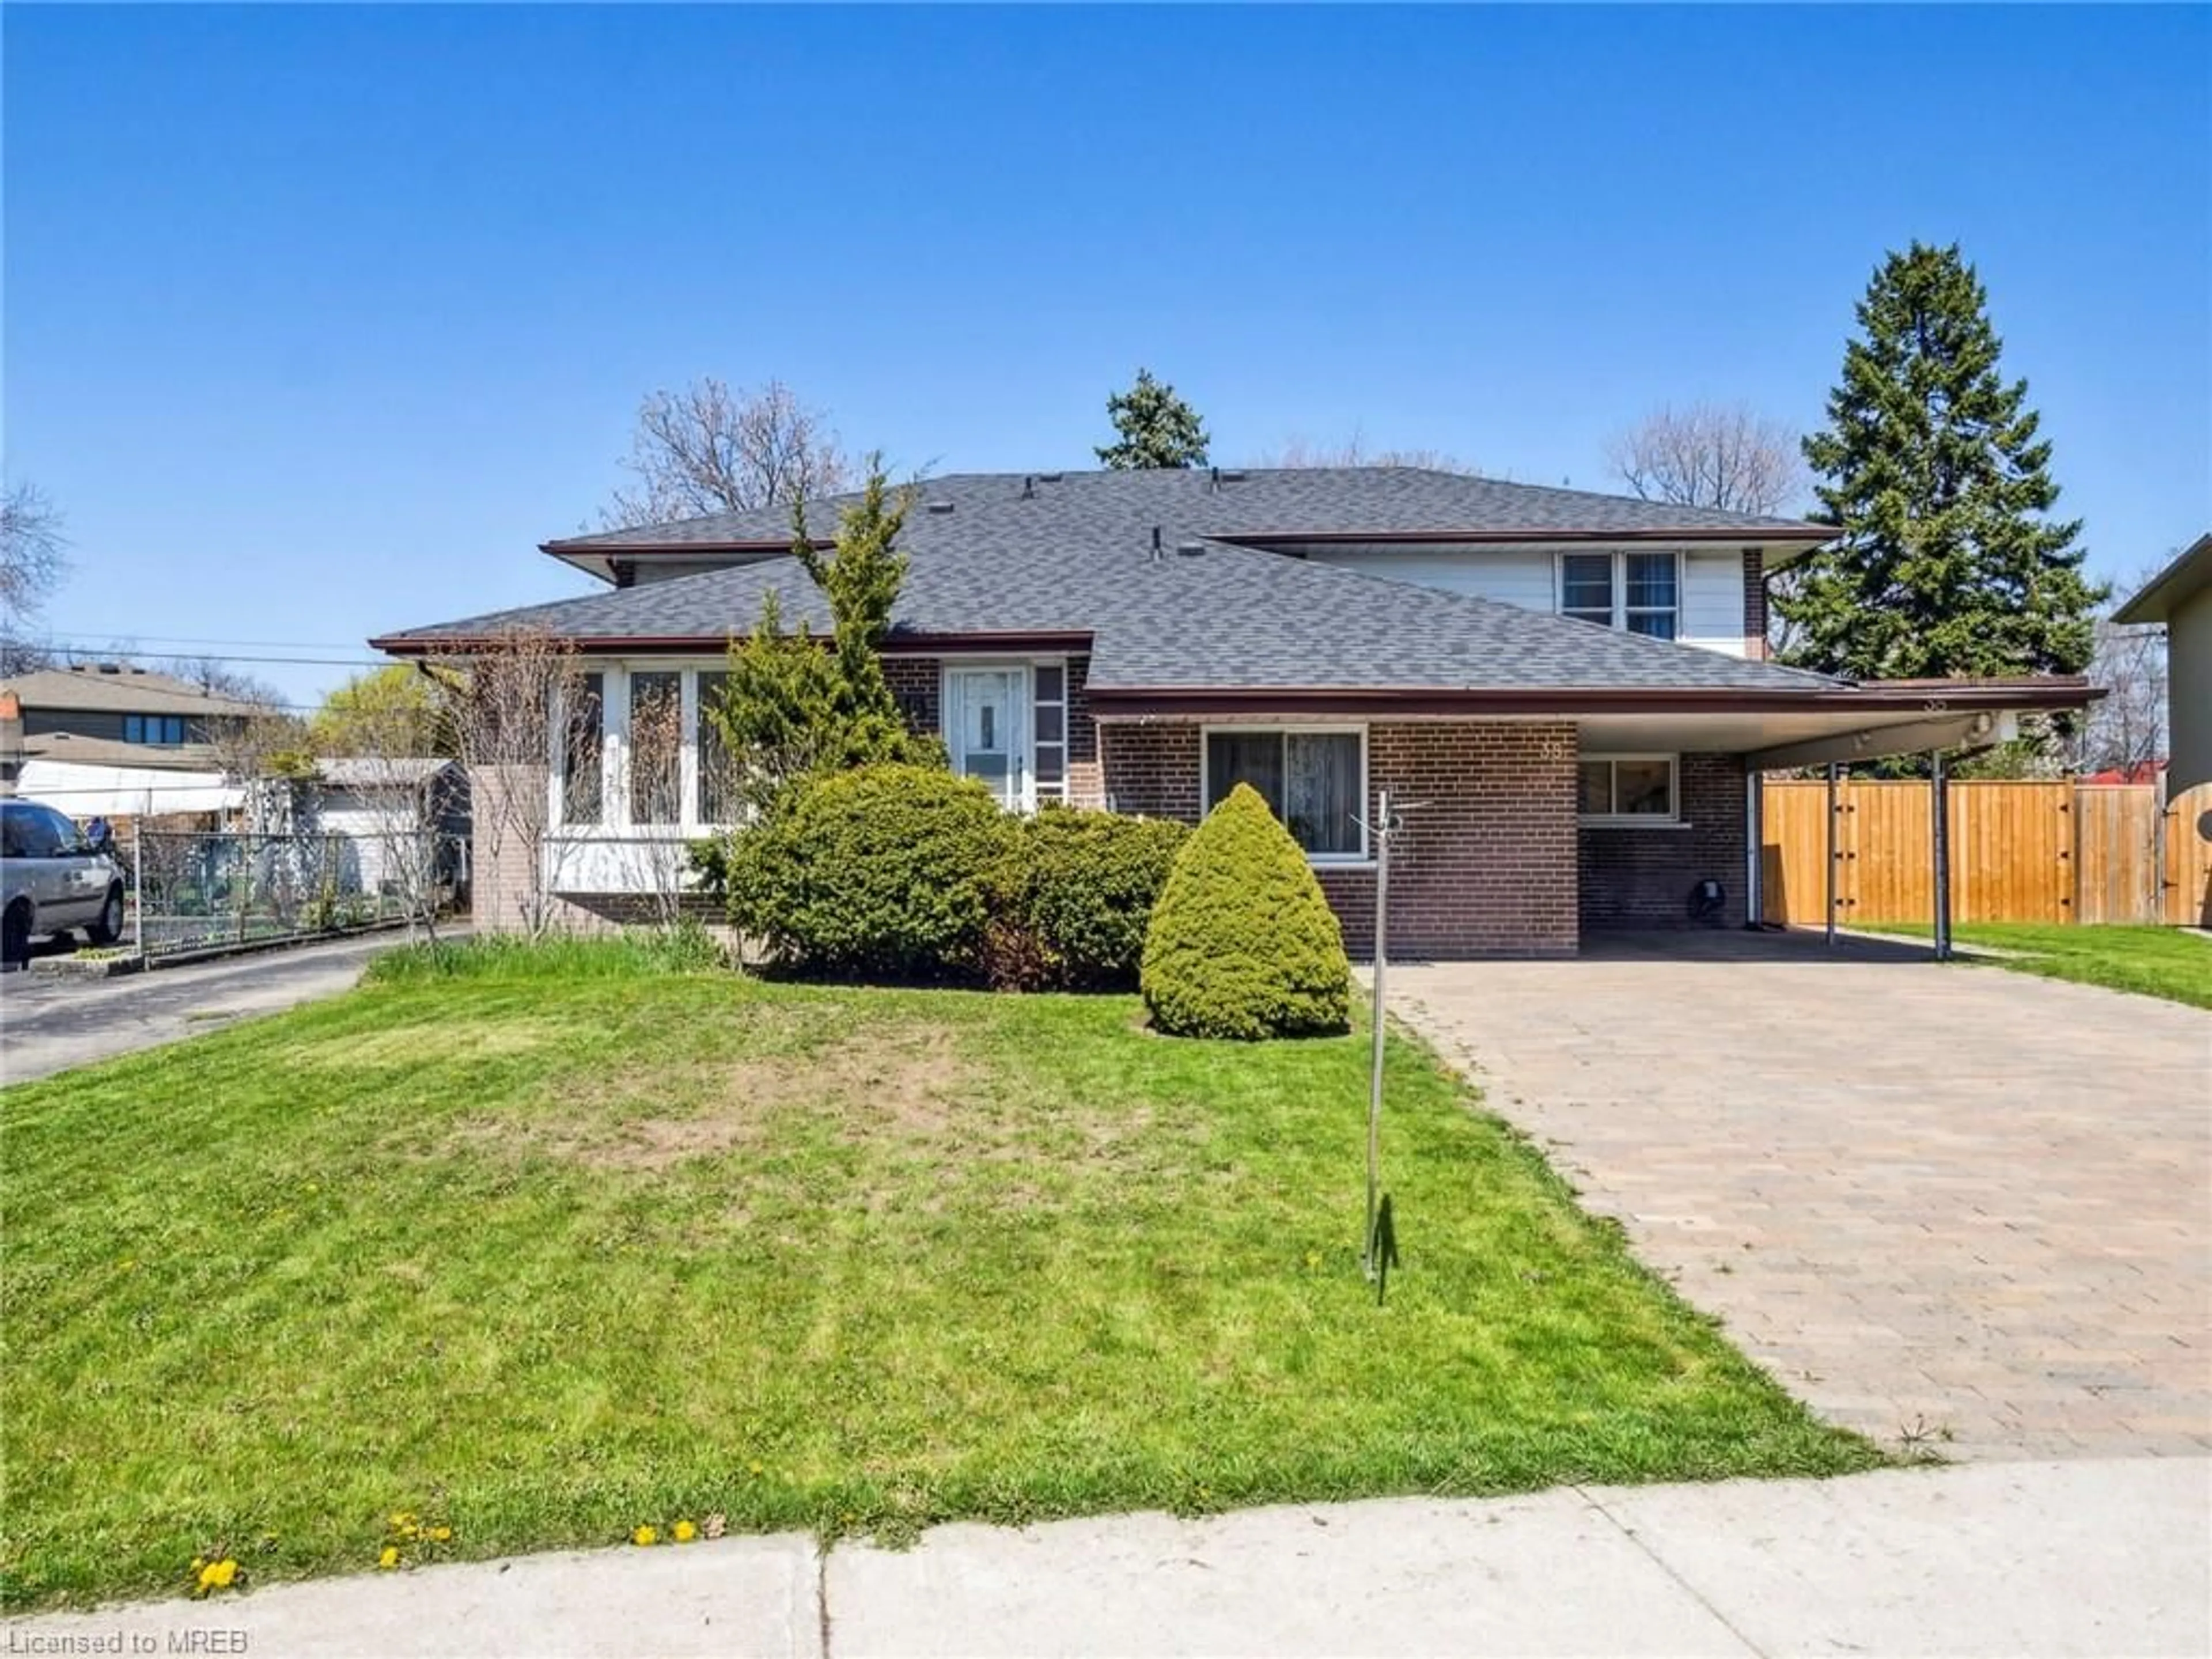 Frontside or backside of a home for 38 Dunsany Cres, Toronto Ontario M9R 3W6